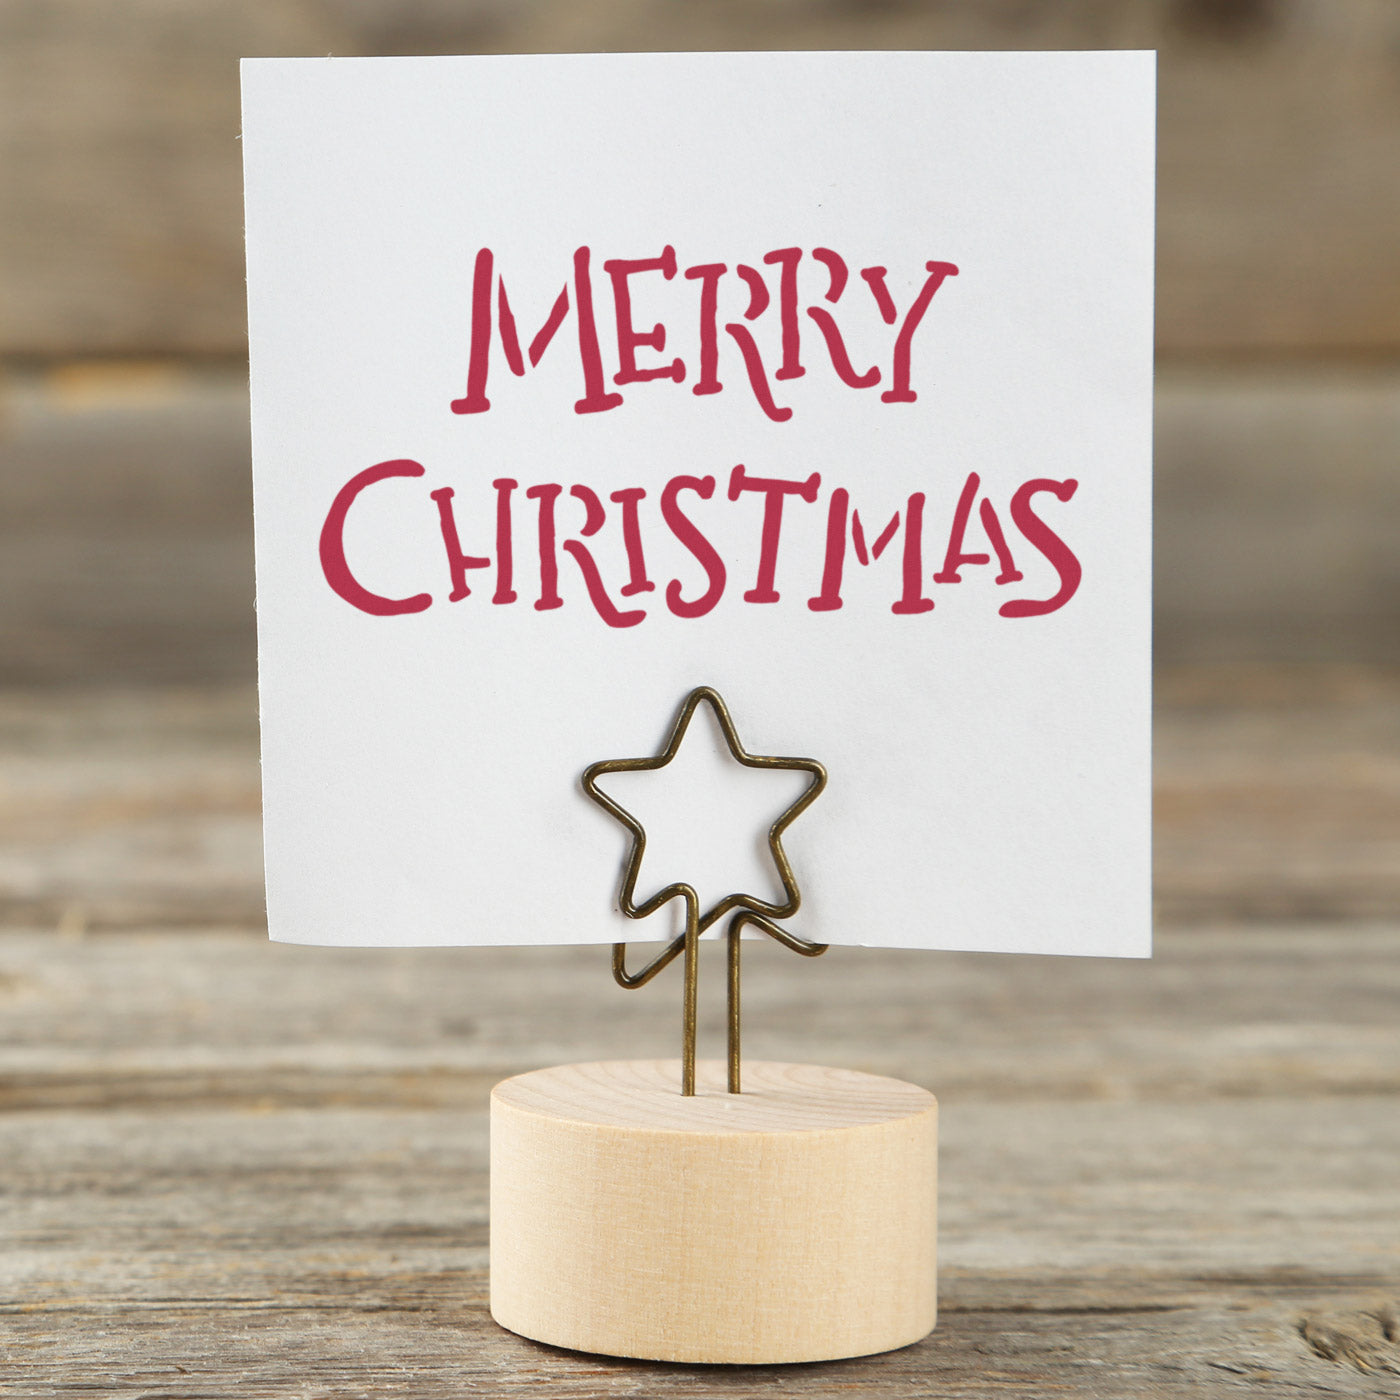 Merry Christmas Stencil - Hand Written Style Table Decoration